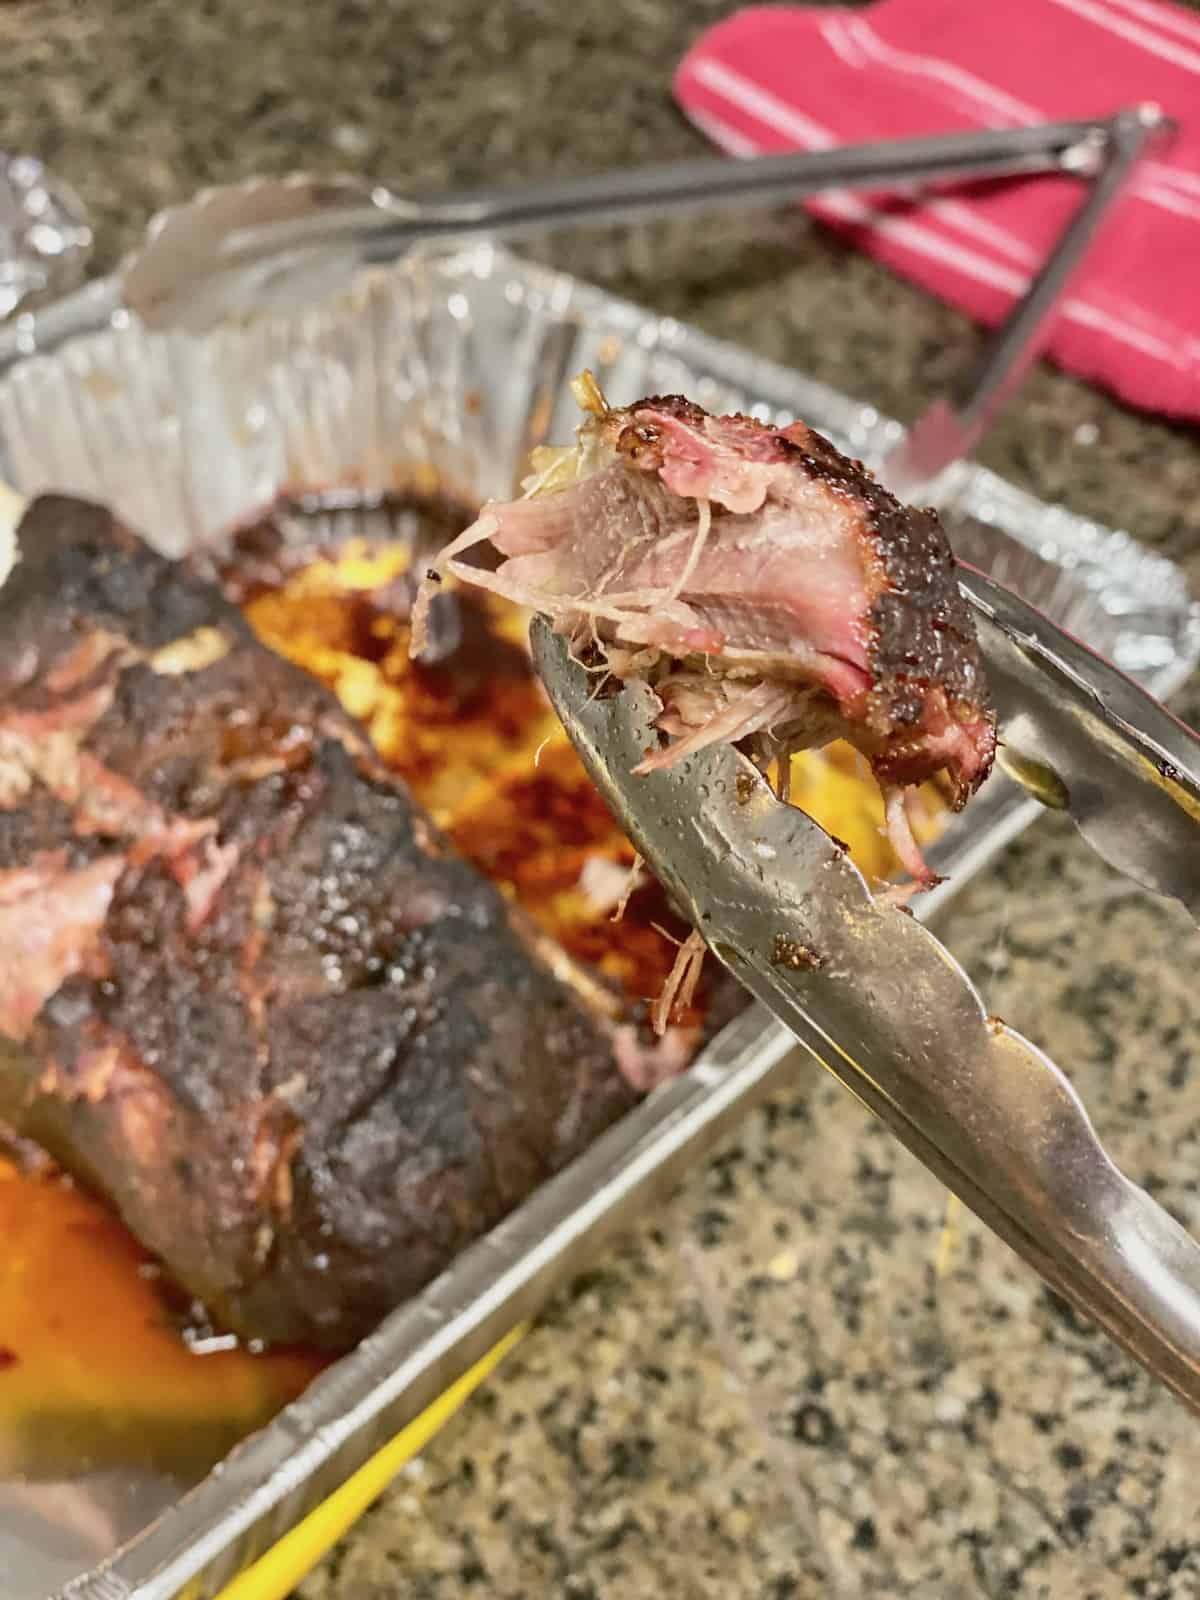 Tongs holding a cooked piece with juicy inside and seasoned dark crust outside of the pork roast.